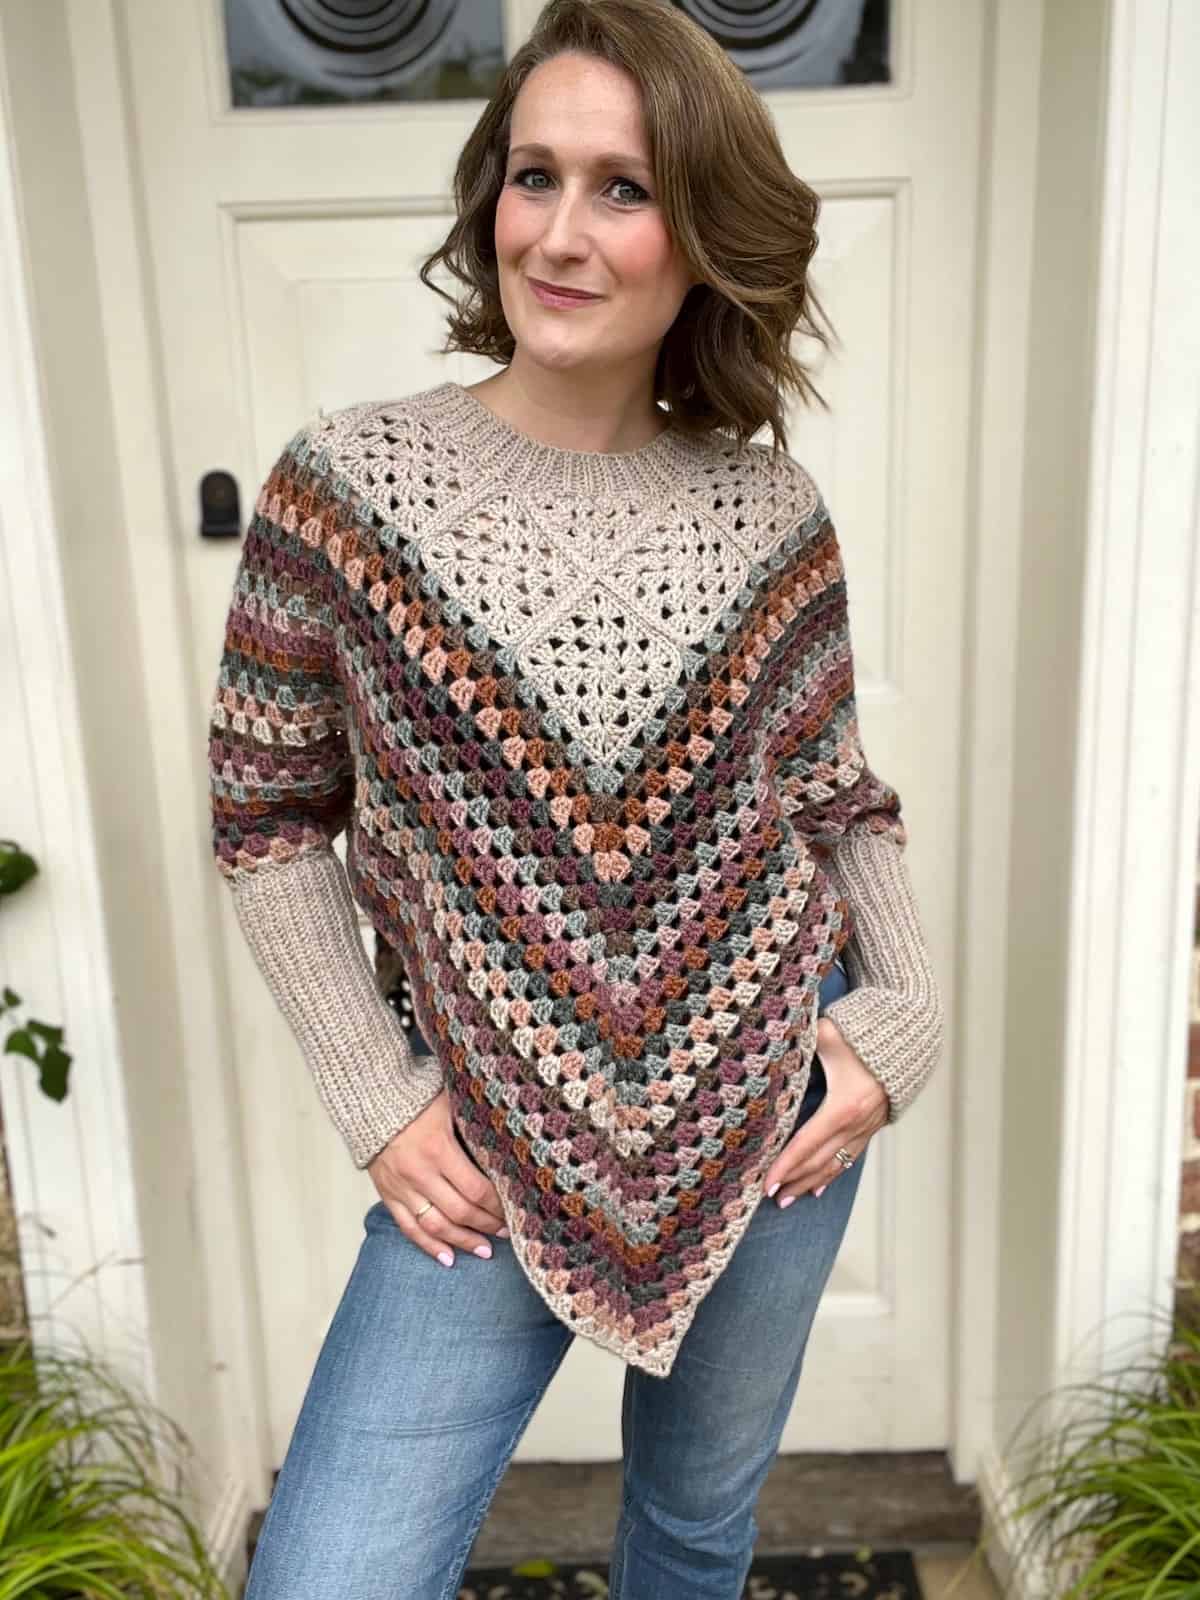 A woman wearing a crocheted poncho standing in front of a door.